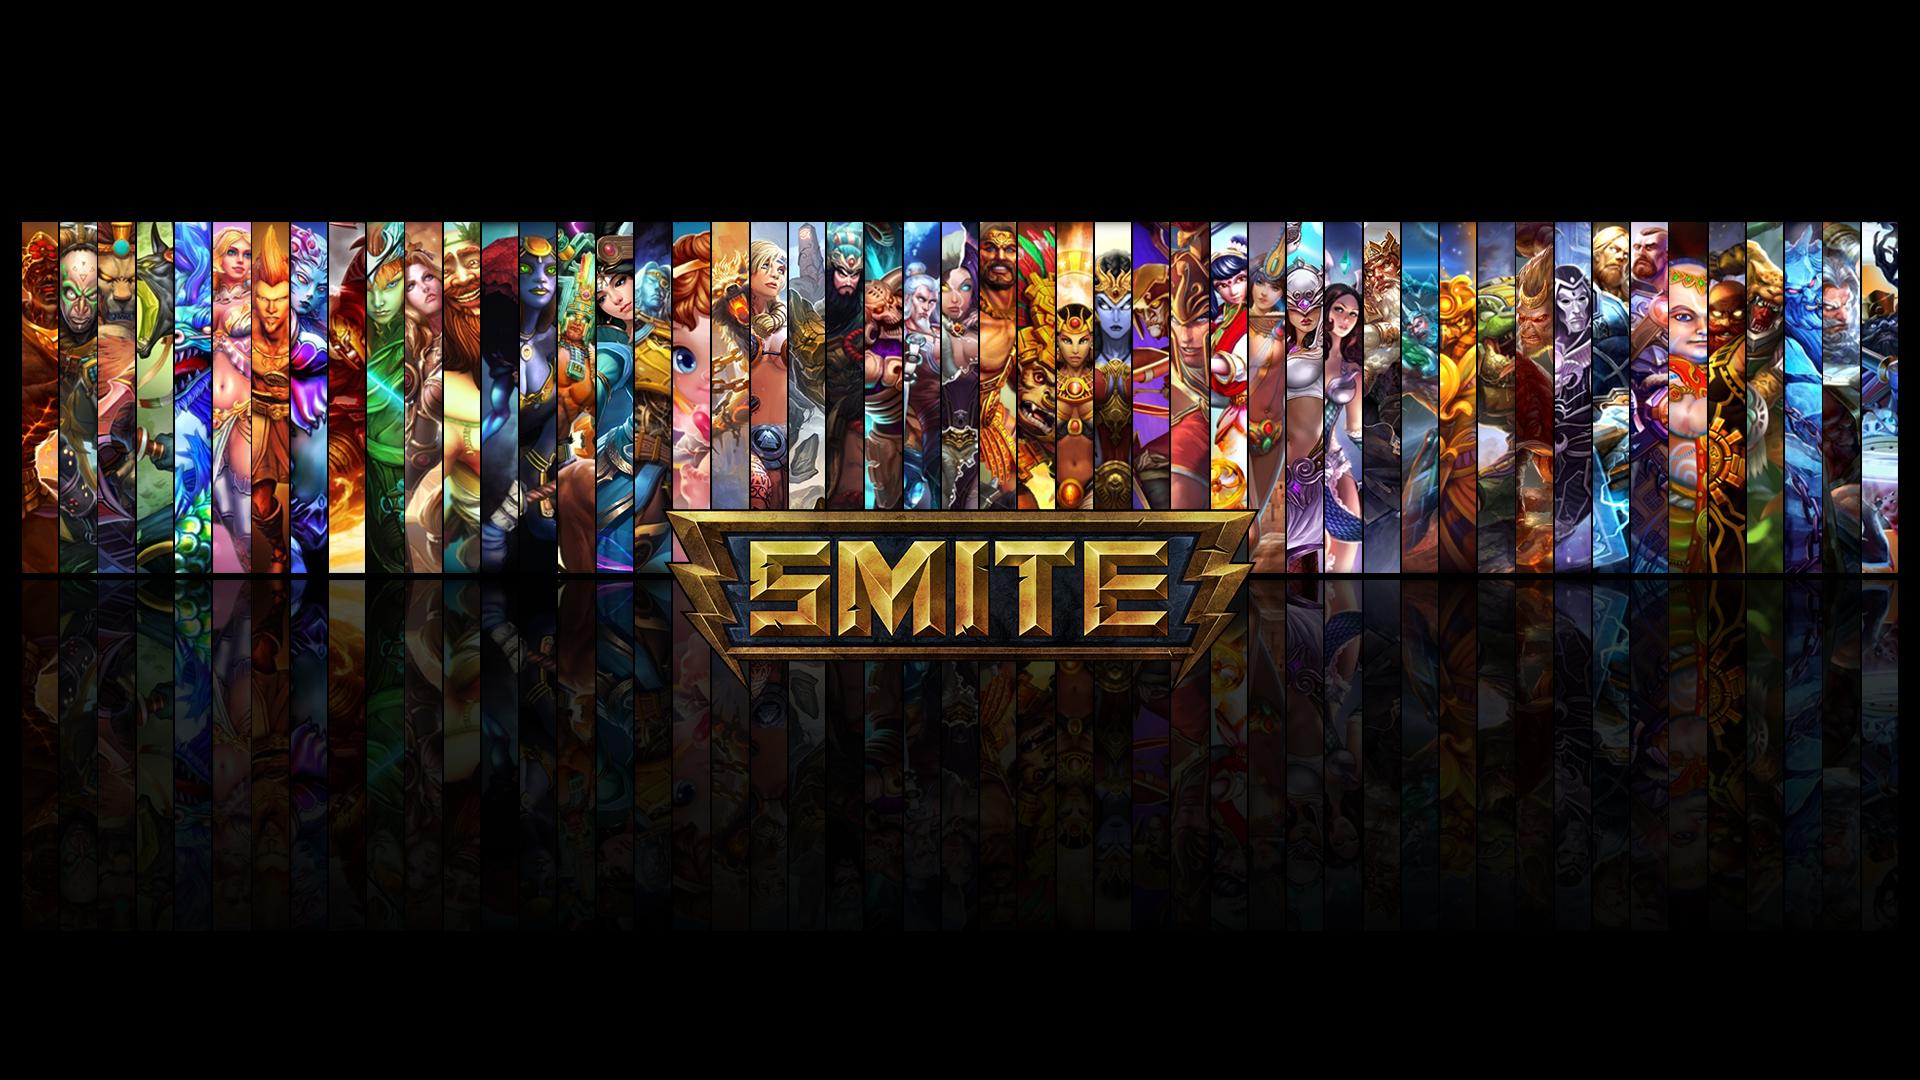 Smite Wallpapers Imgur Picture 1920x1080